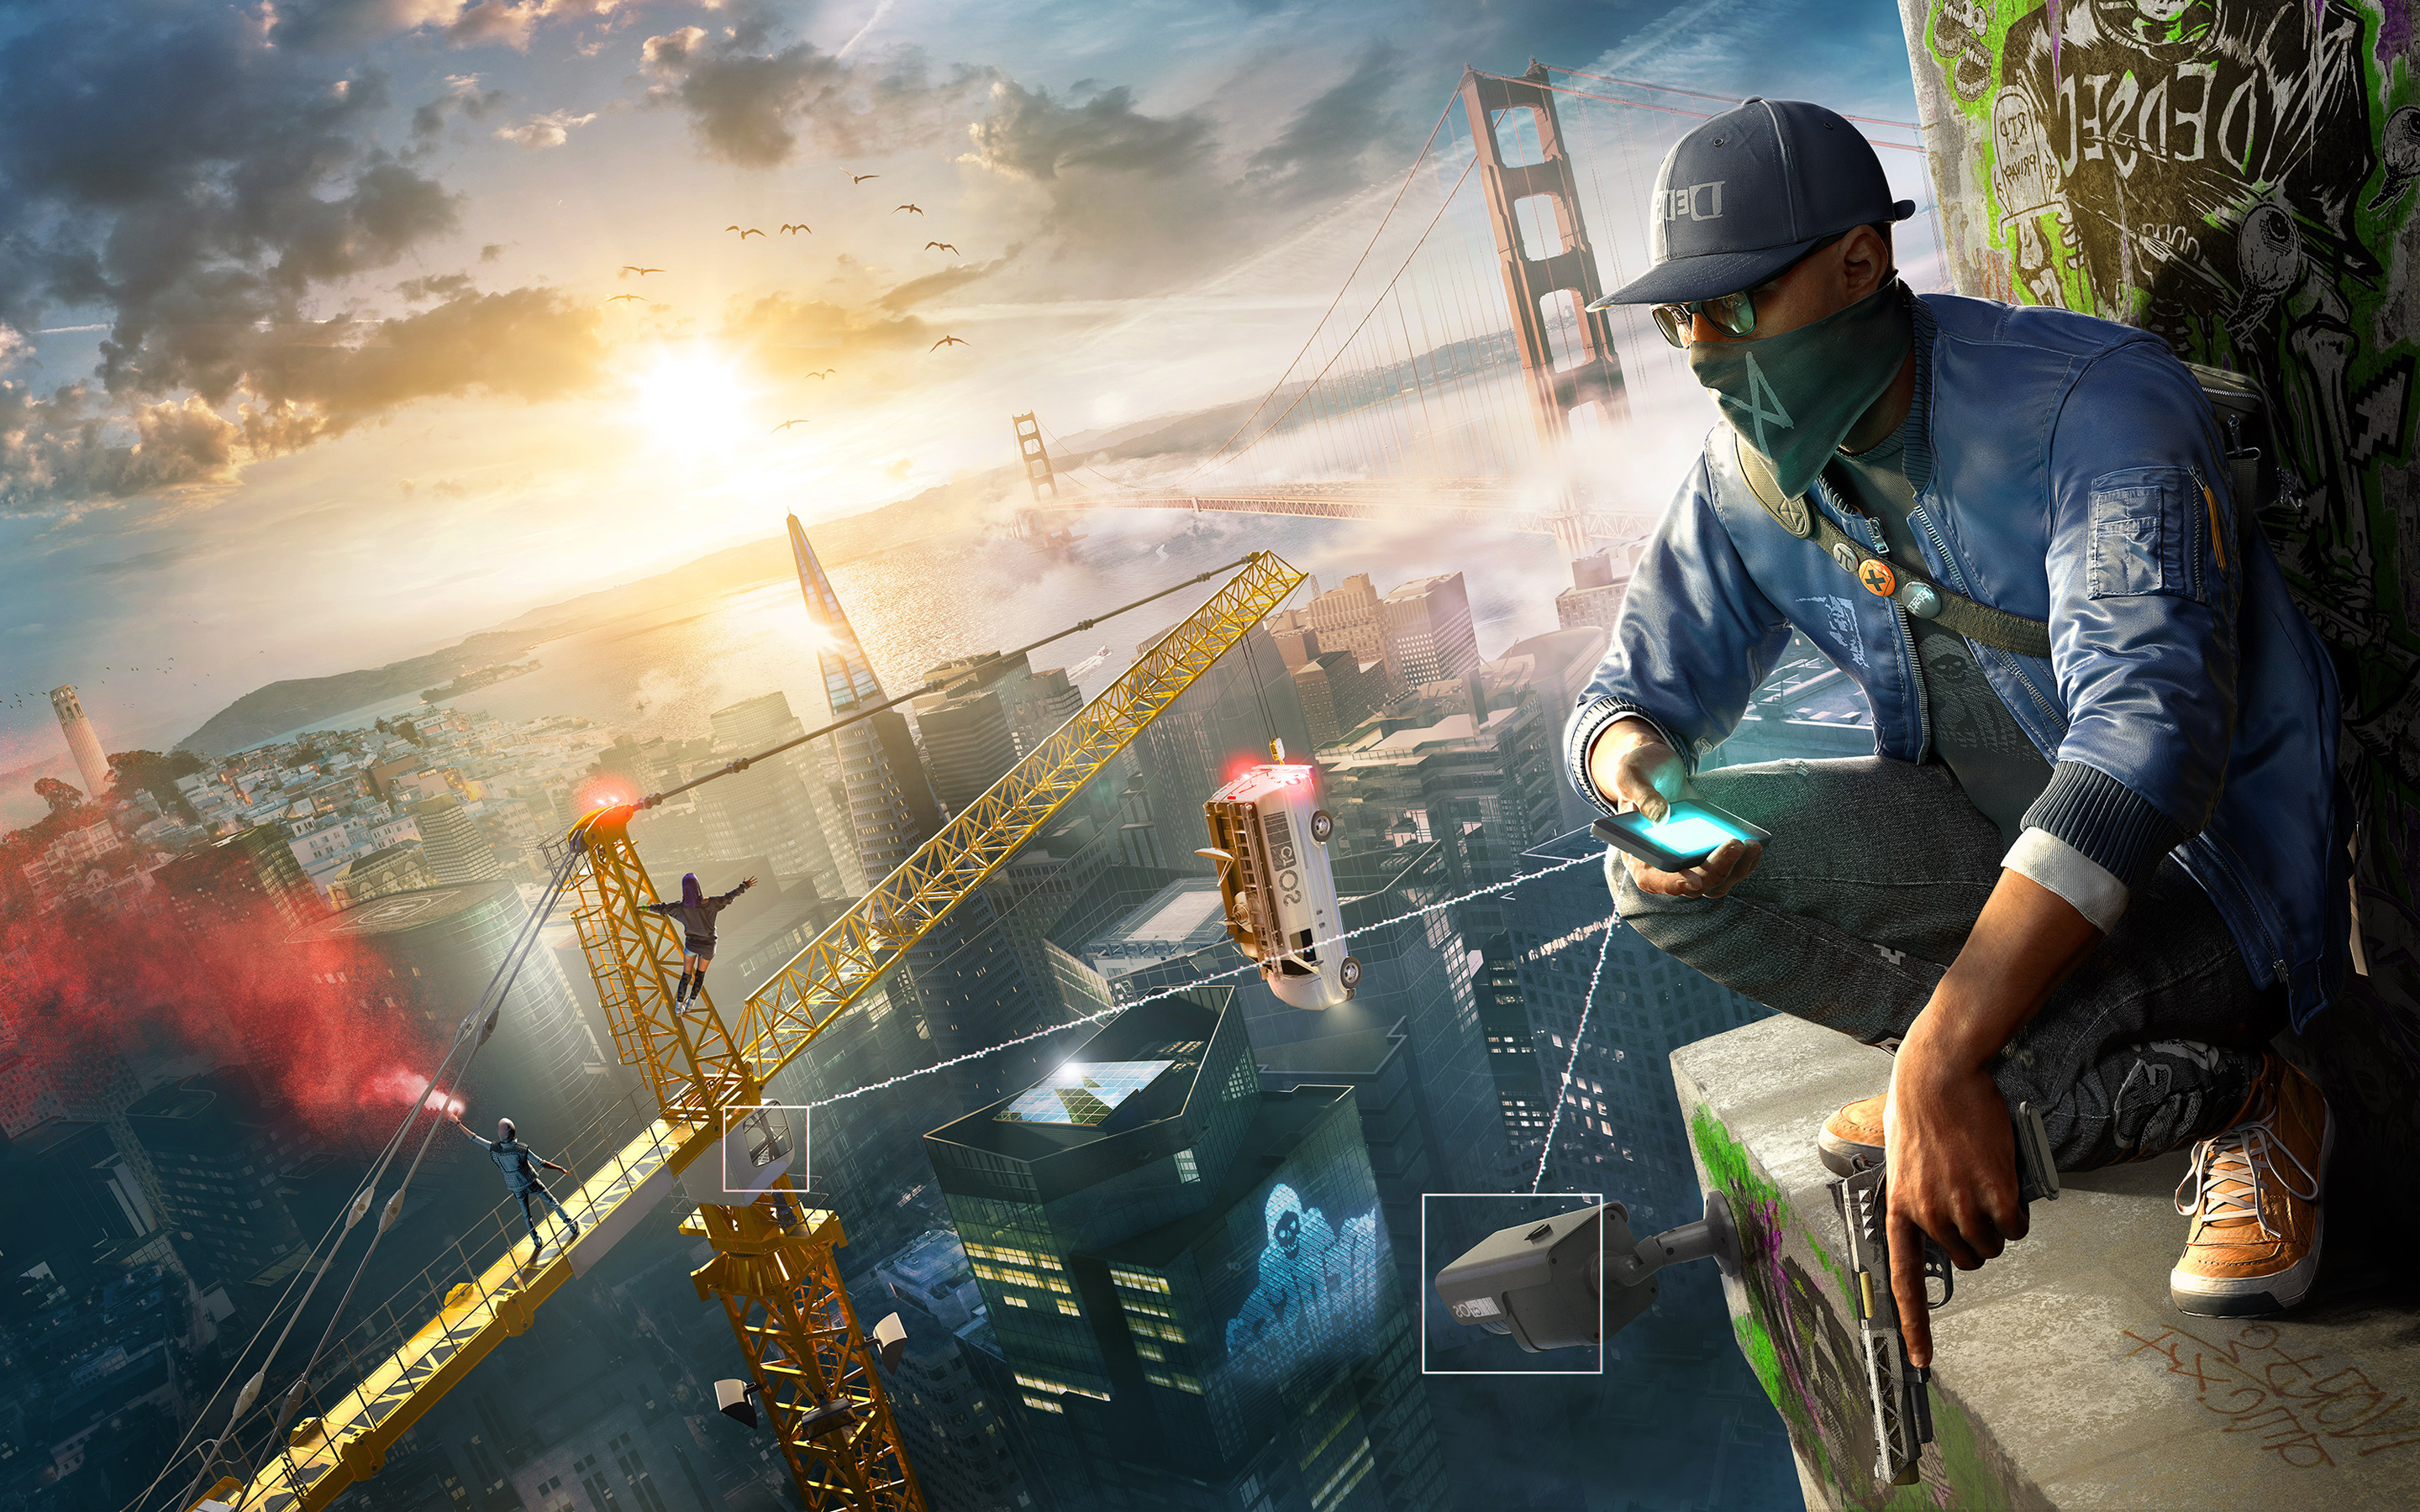 Free download watch dogs game hd wallpapers x for your desktop mobile tablet explore watch dogs video game wallpapers video game backgrounds wallpapers video game watch dogs wallpaper